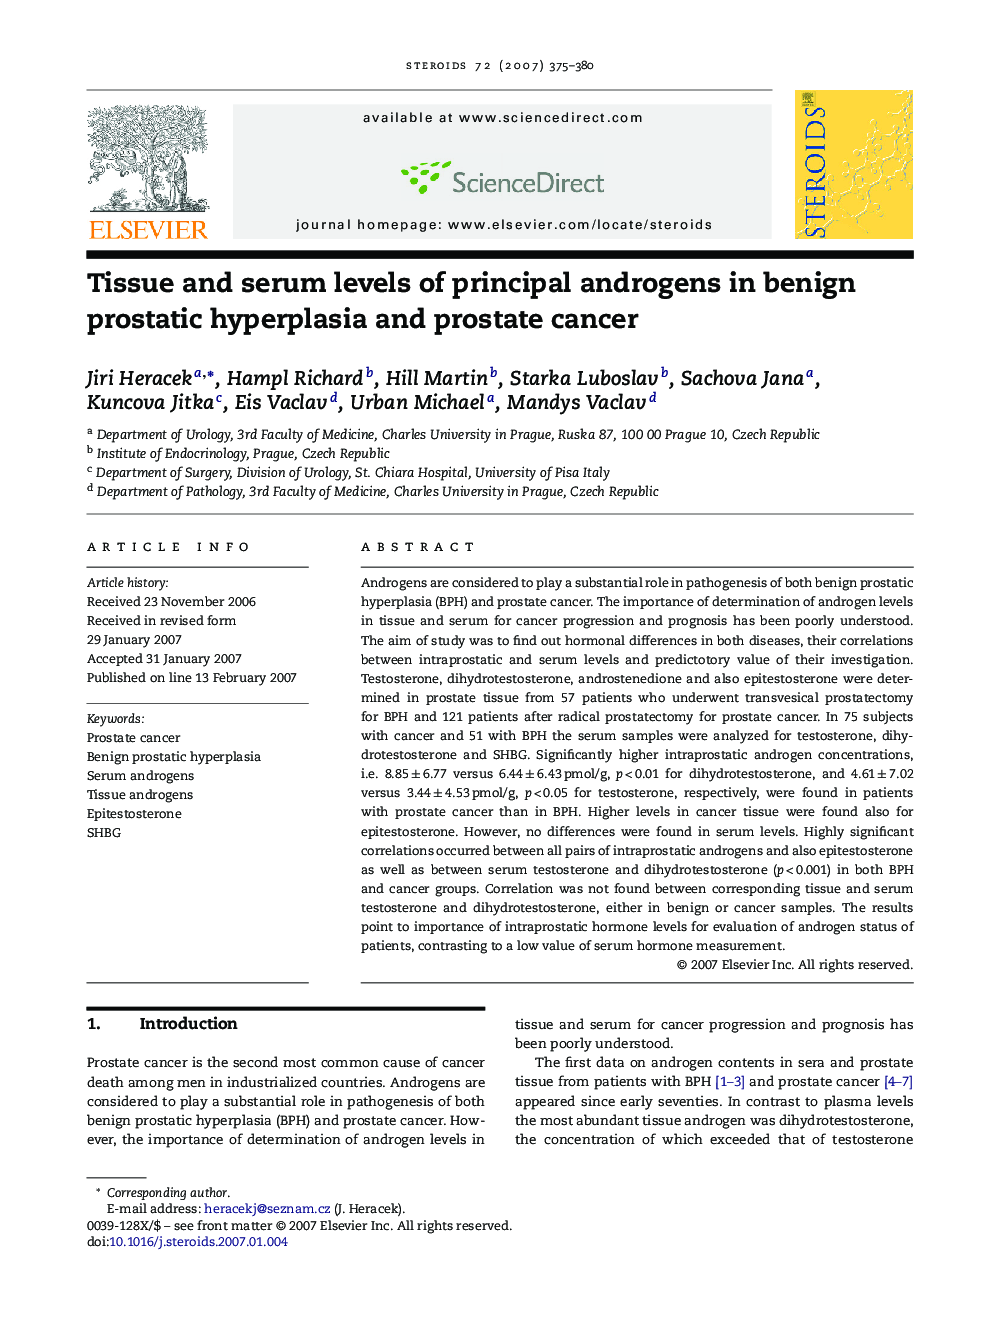 Tissue and serum levels of principal androgens in benign prostatic hyperplasia and prostate cancer